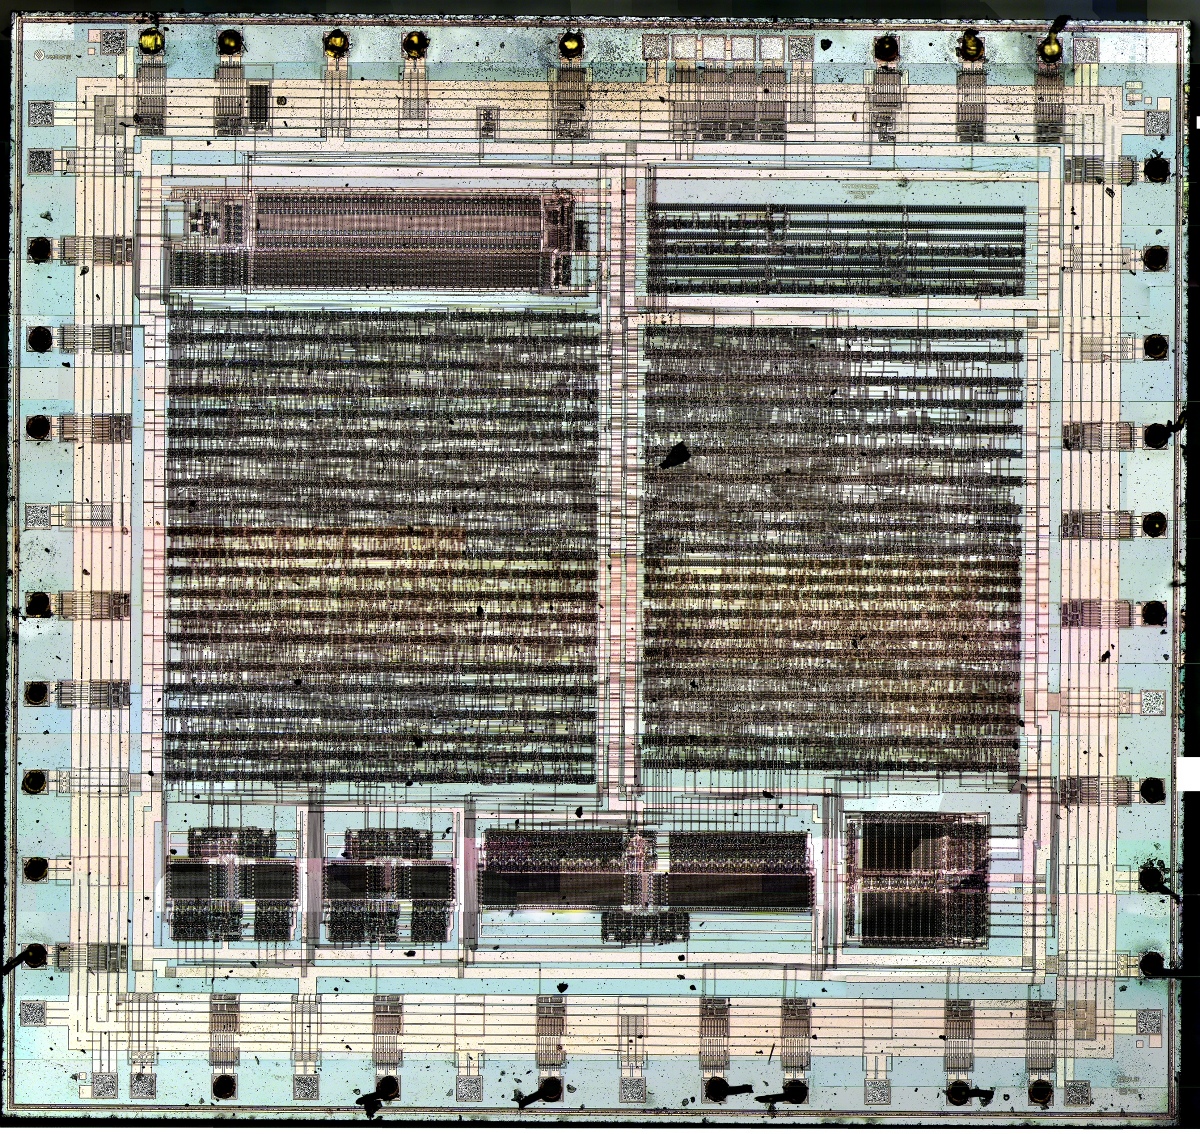 MYK-78 "Clipper Chip" by Travis Goodspeed, see: https://commons.wikimedia.org/wiki/File:MYK-78_Clipper_Chip.jpg